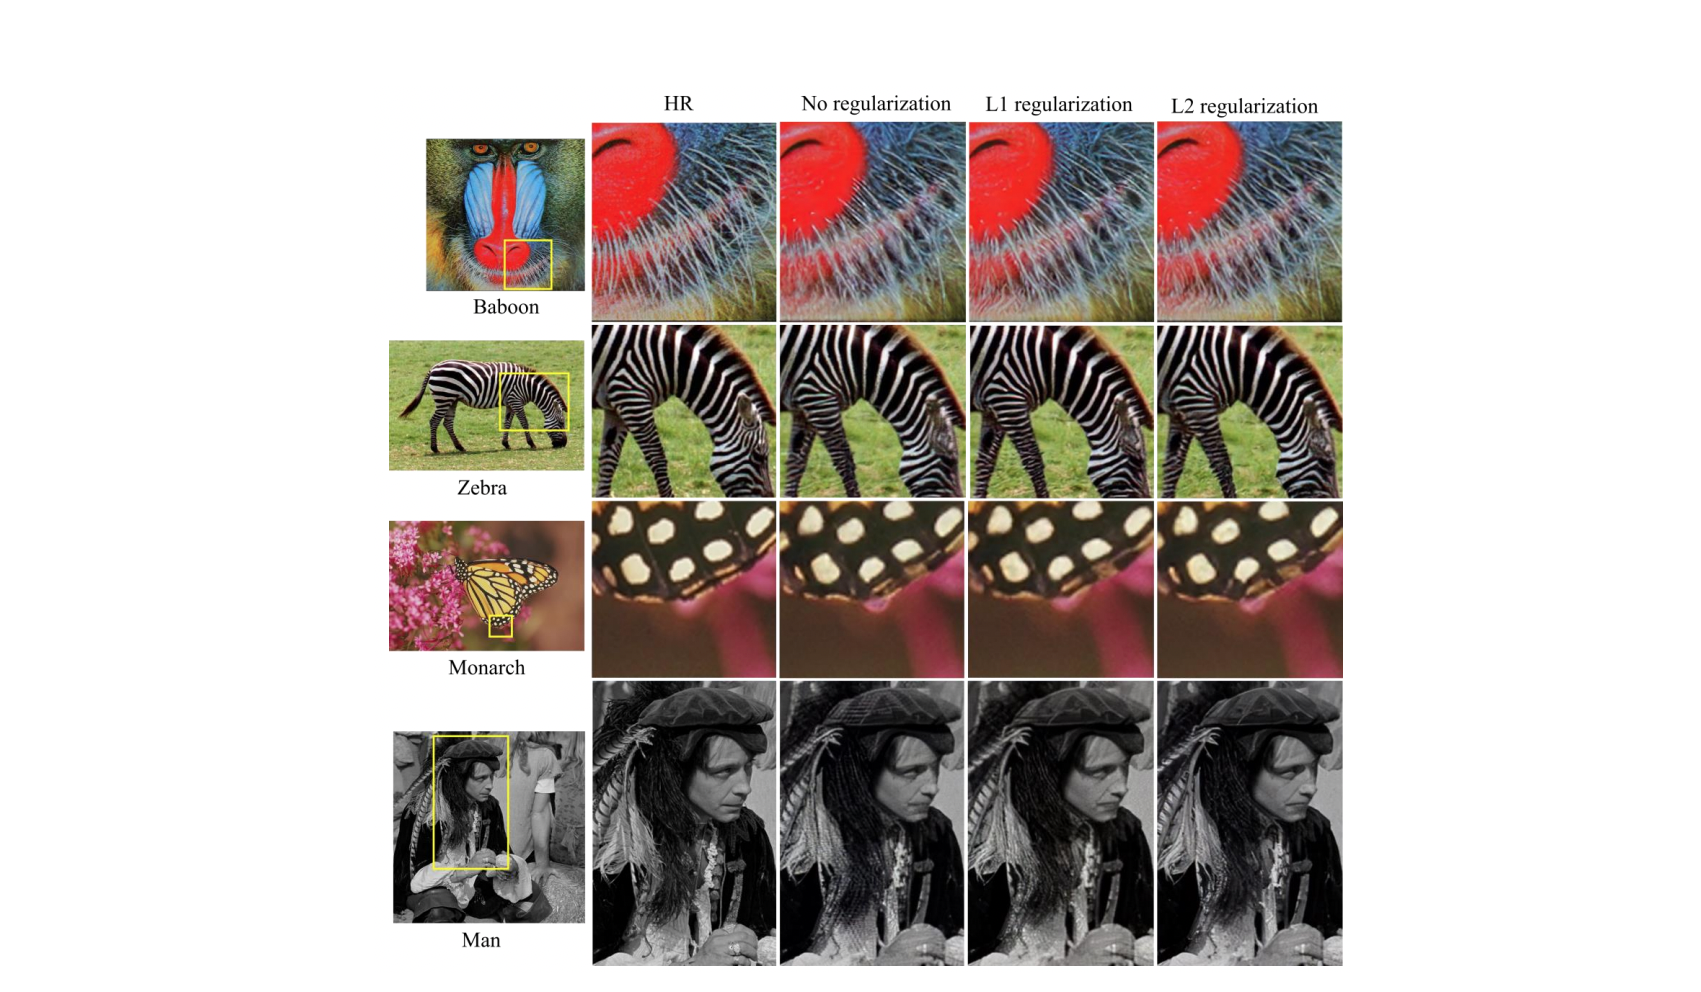 A regularization-based generative adversarial network for single image super-resolution